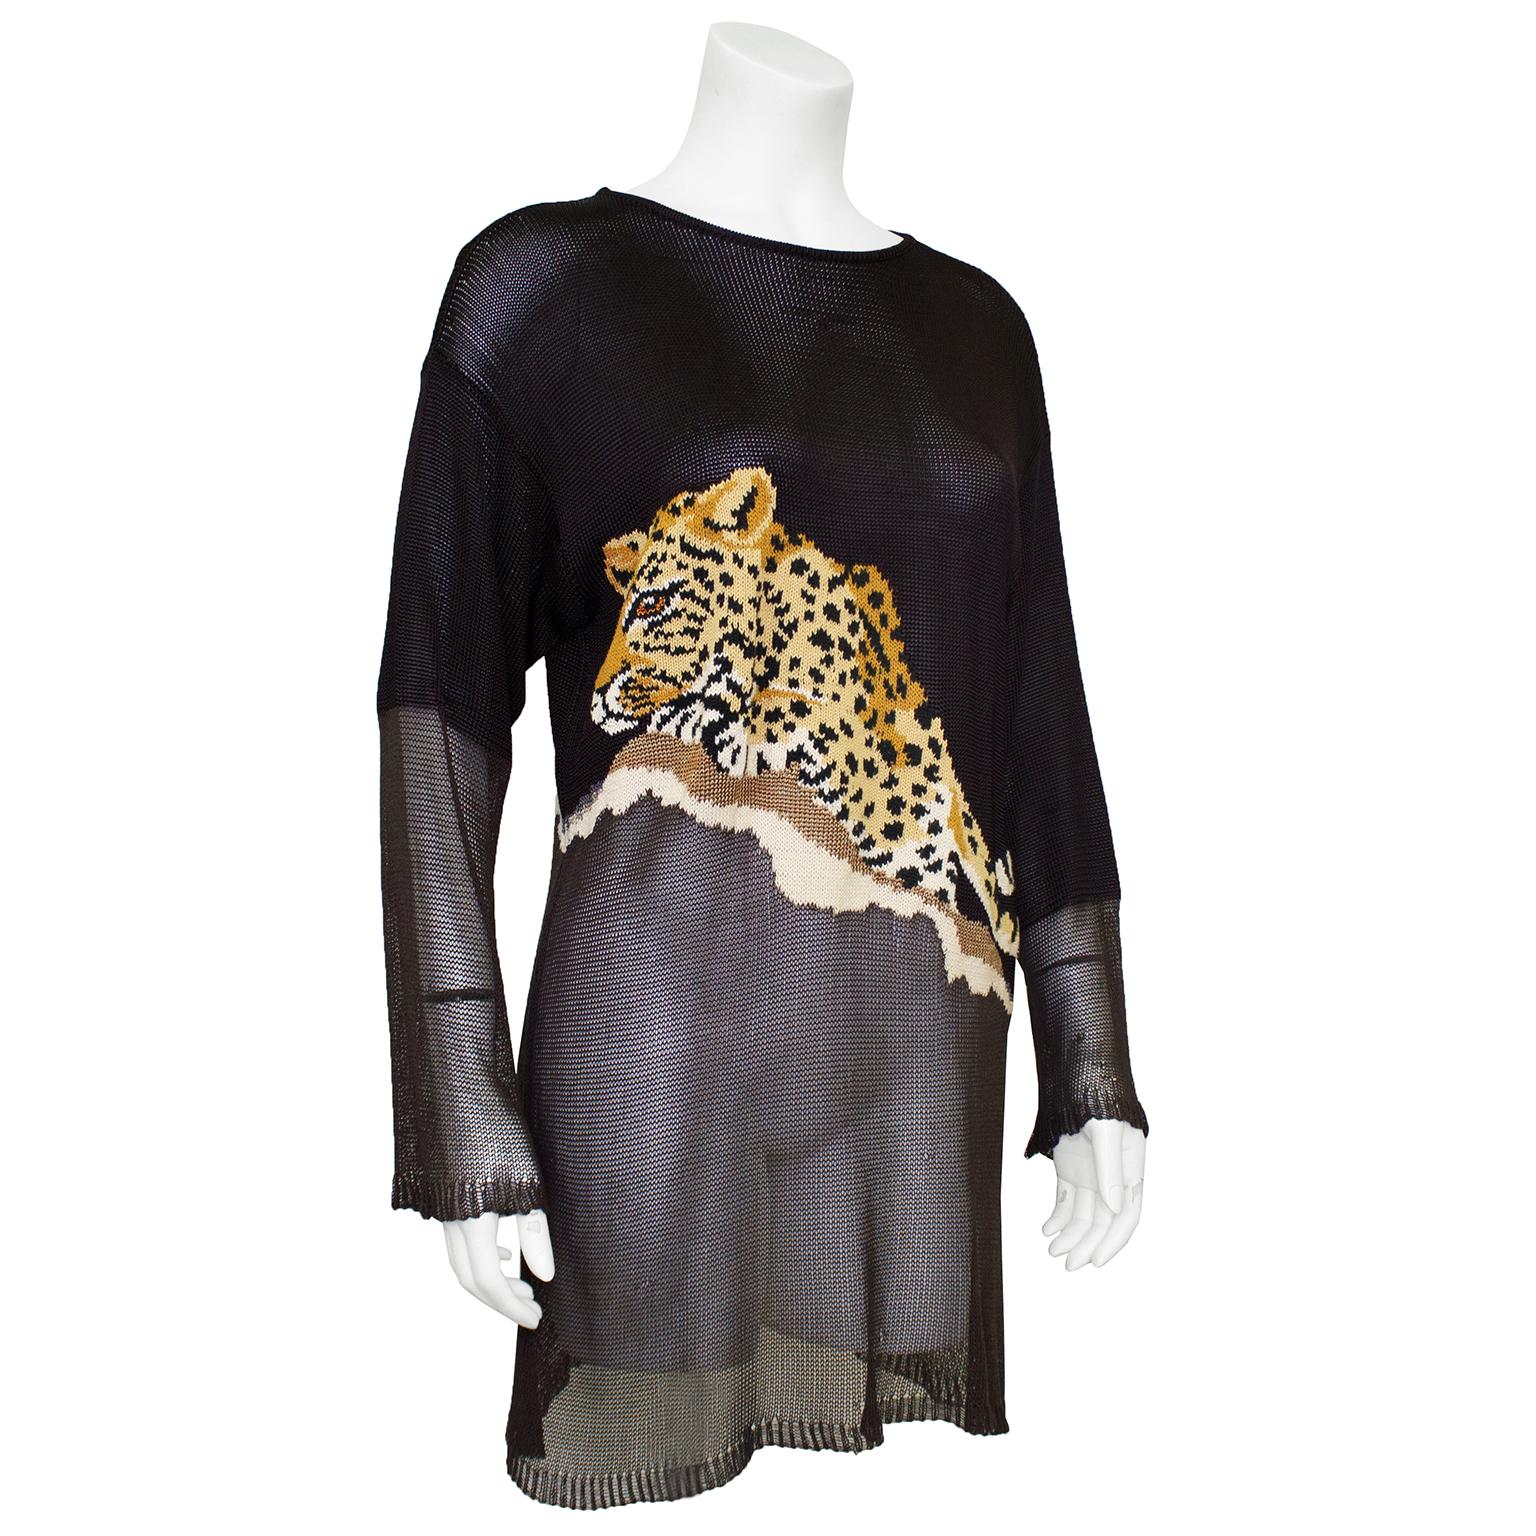 Krizia tunic length sweater from the 1980s. Sheer dark chocolate brown knit with a large illustration of a leopard laying on an asymmetrical ledge. Below the illustration, the sweater cascades into a thinner open knit that is more see through. The